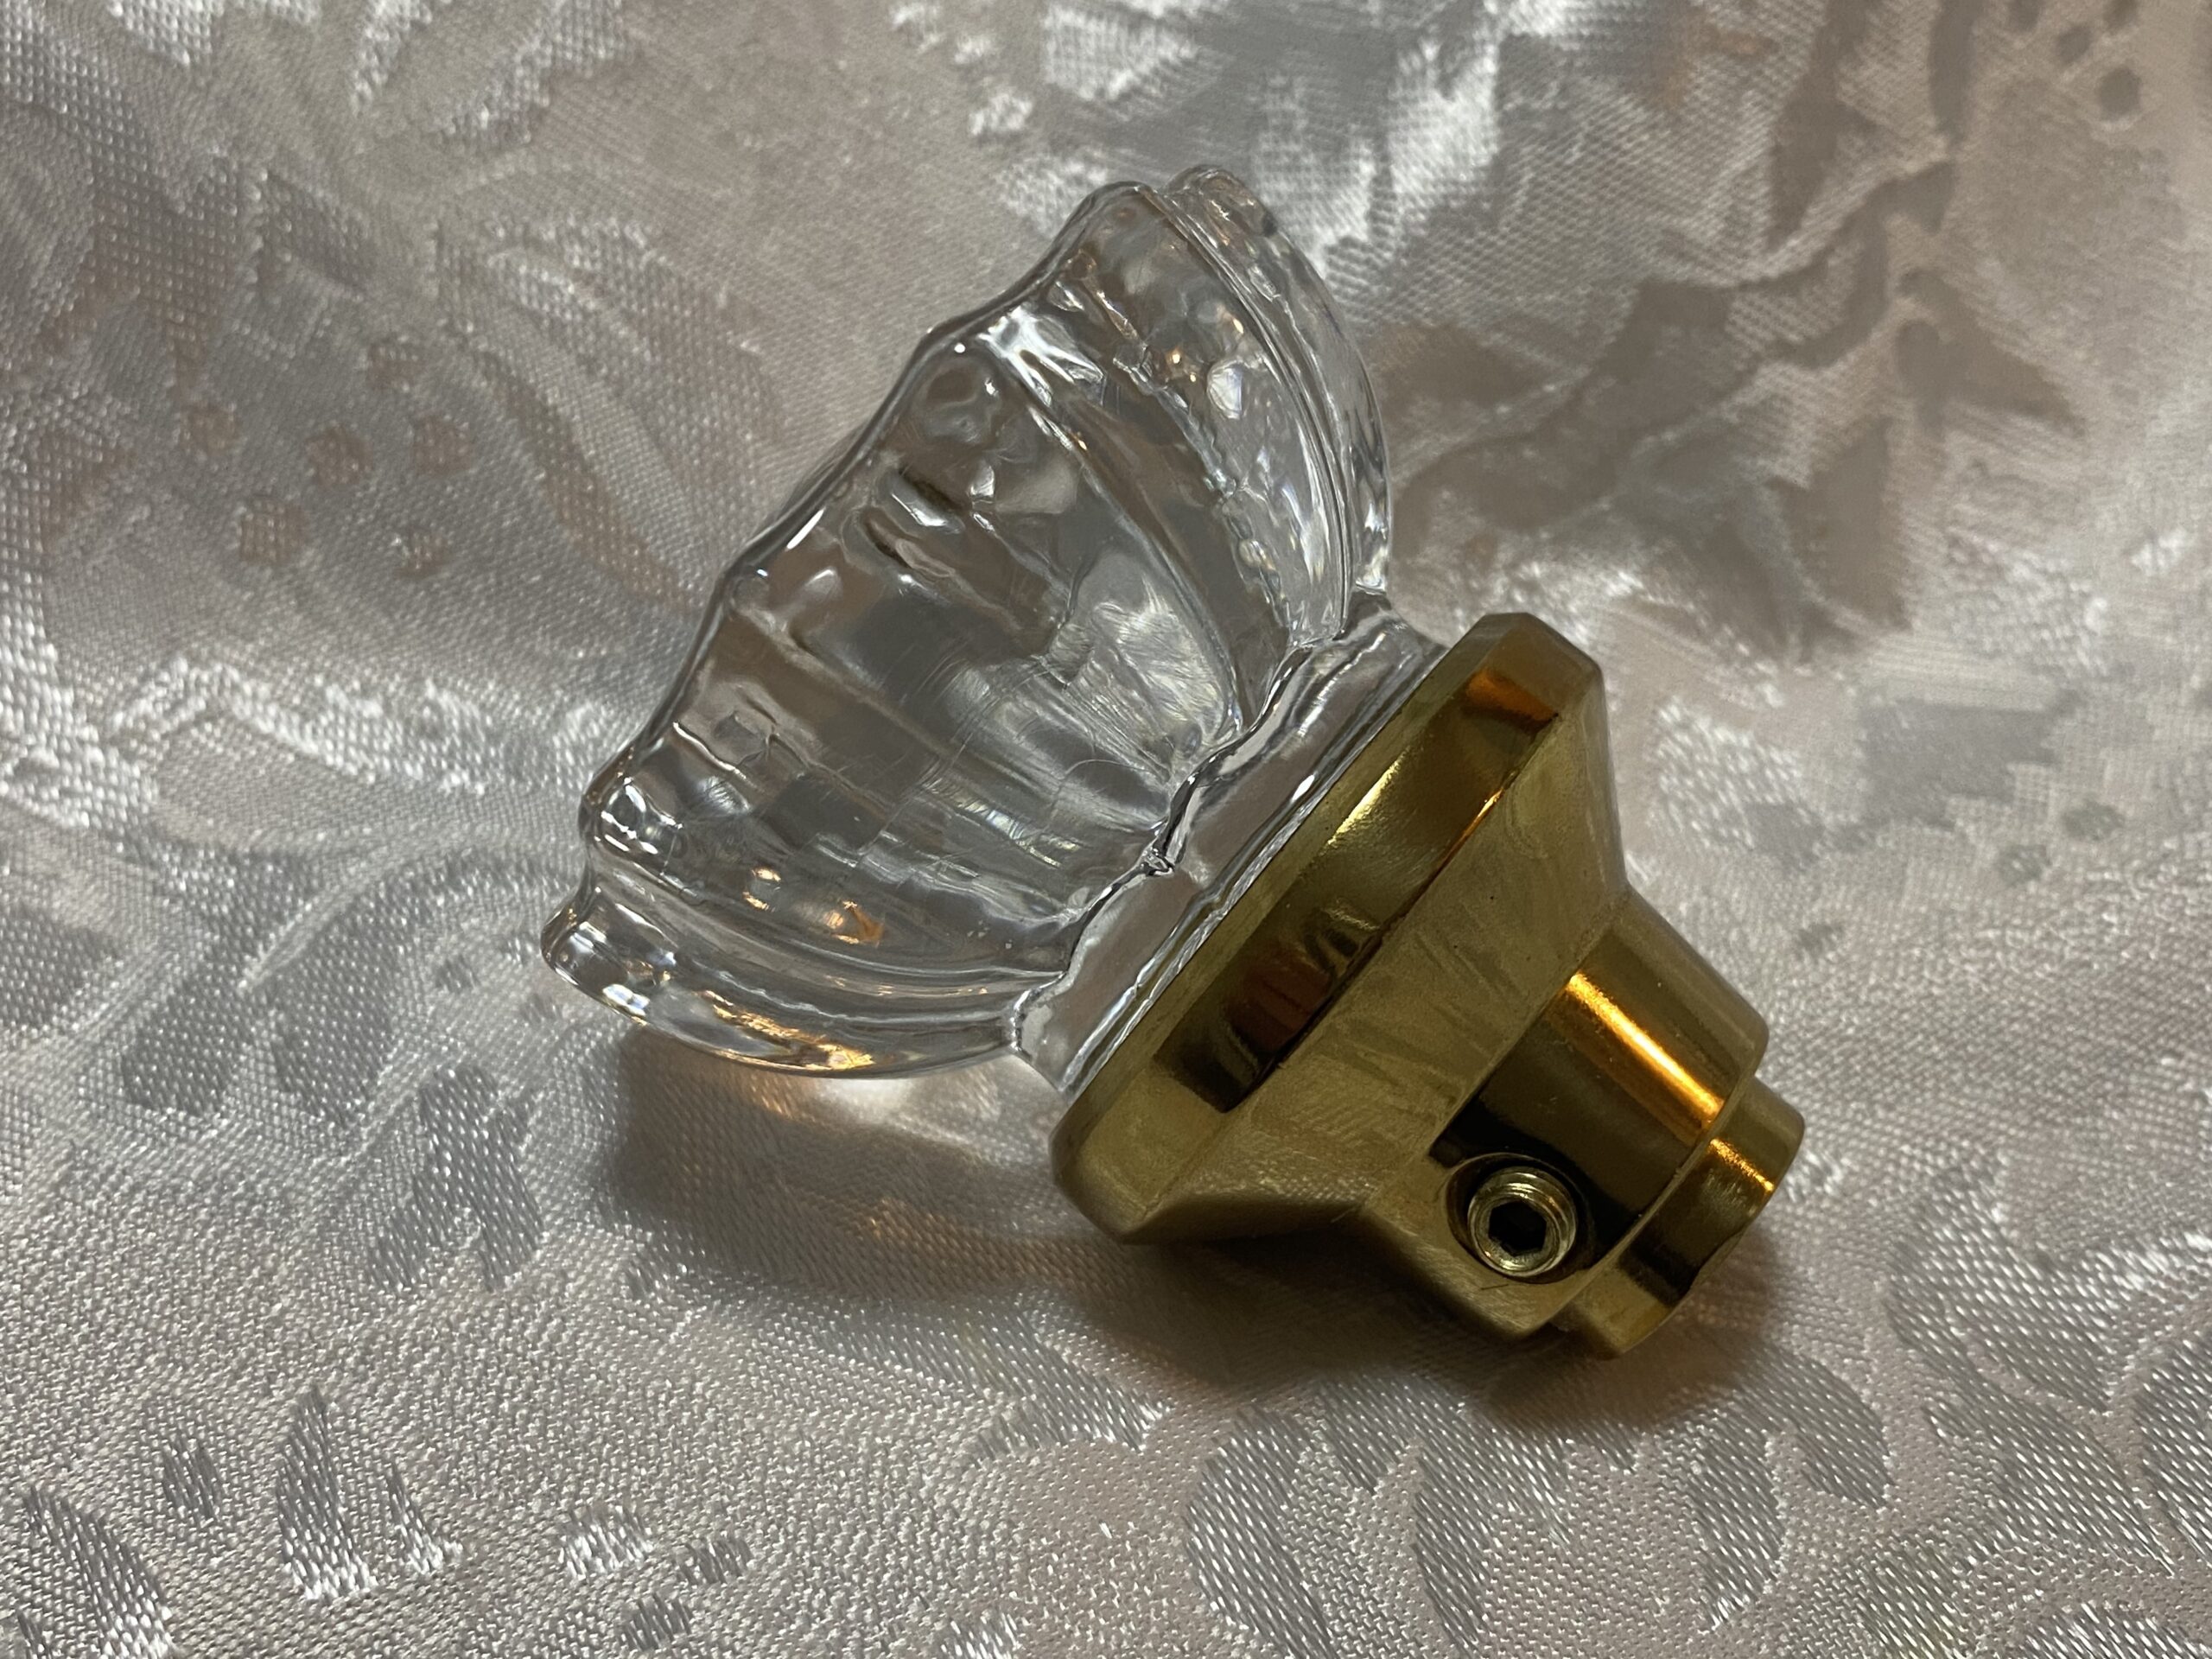 Vintage-style glass and brass door knob (from Nostalgia Warehouse